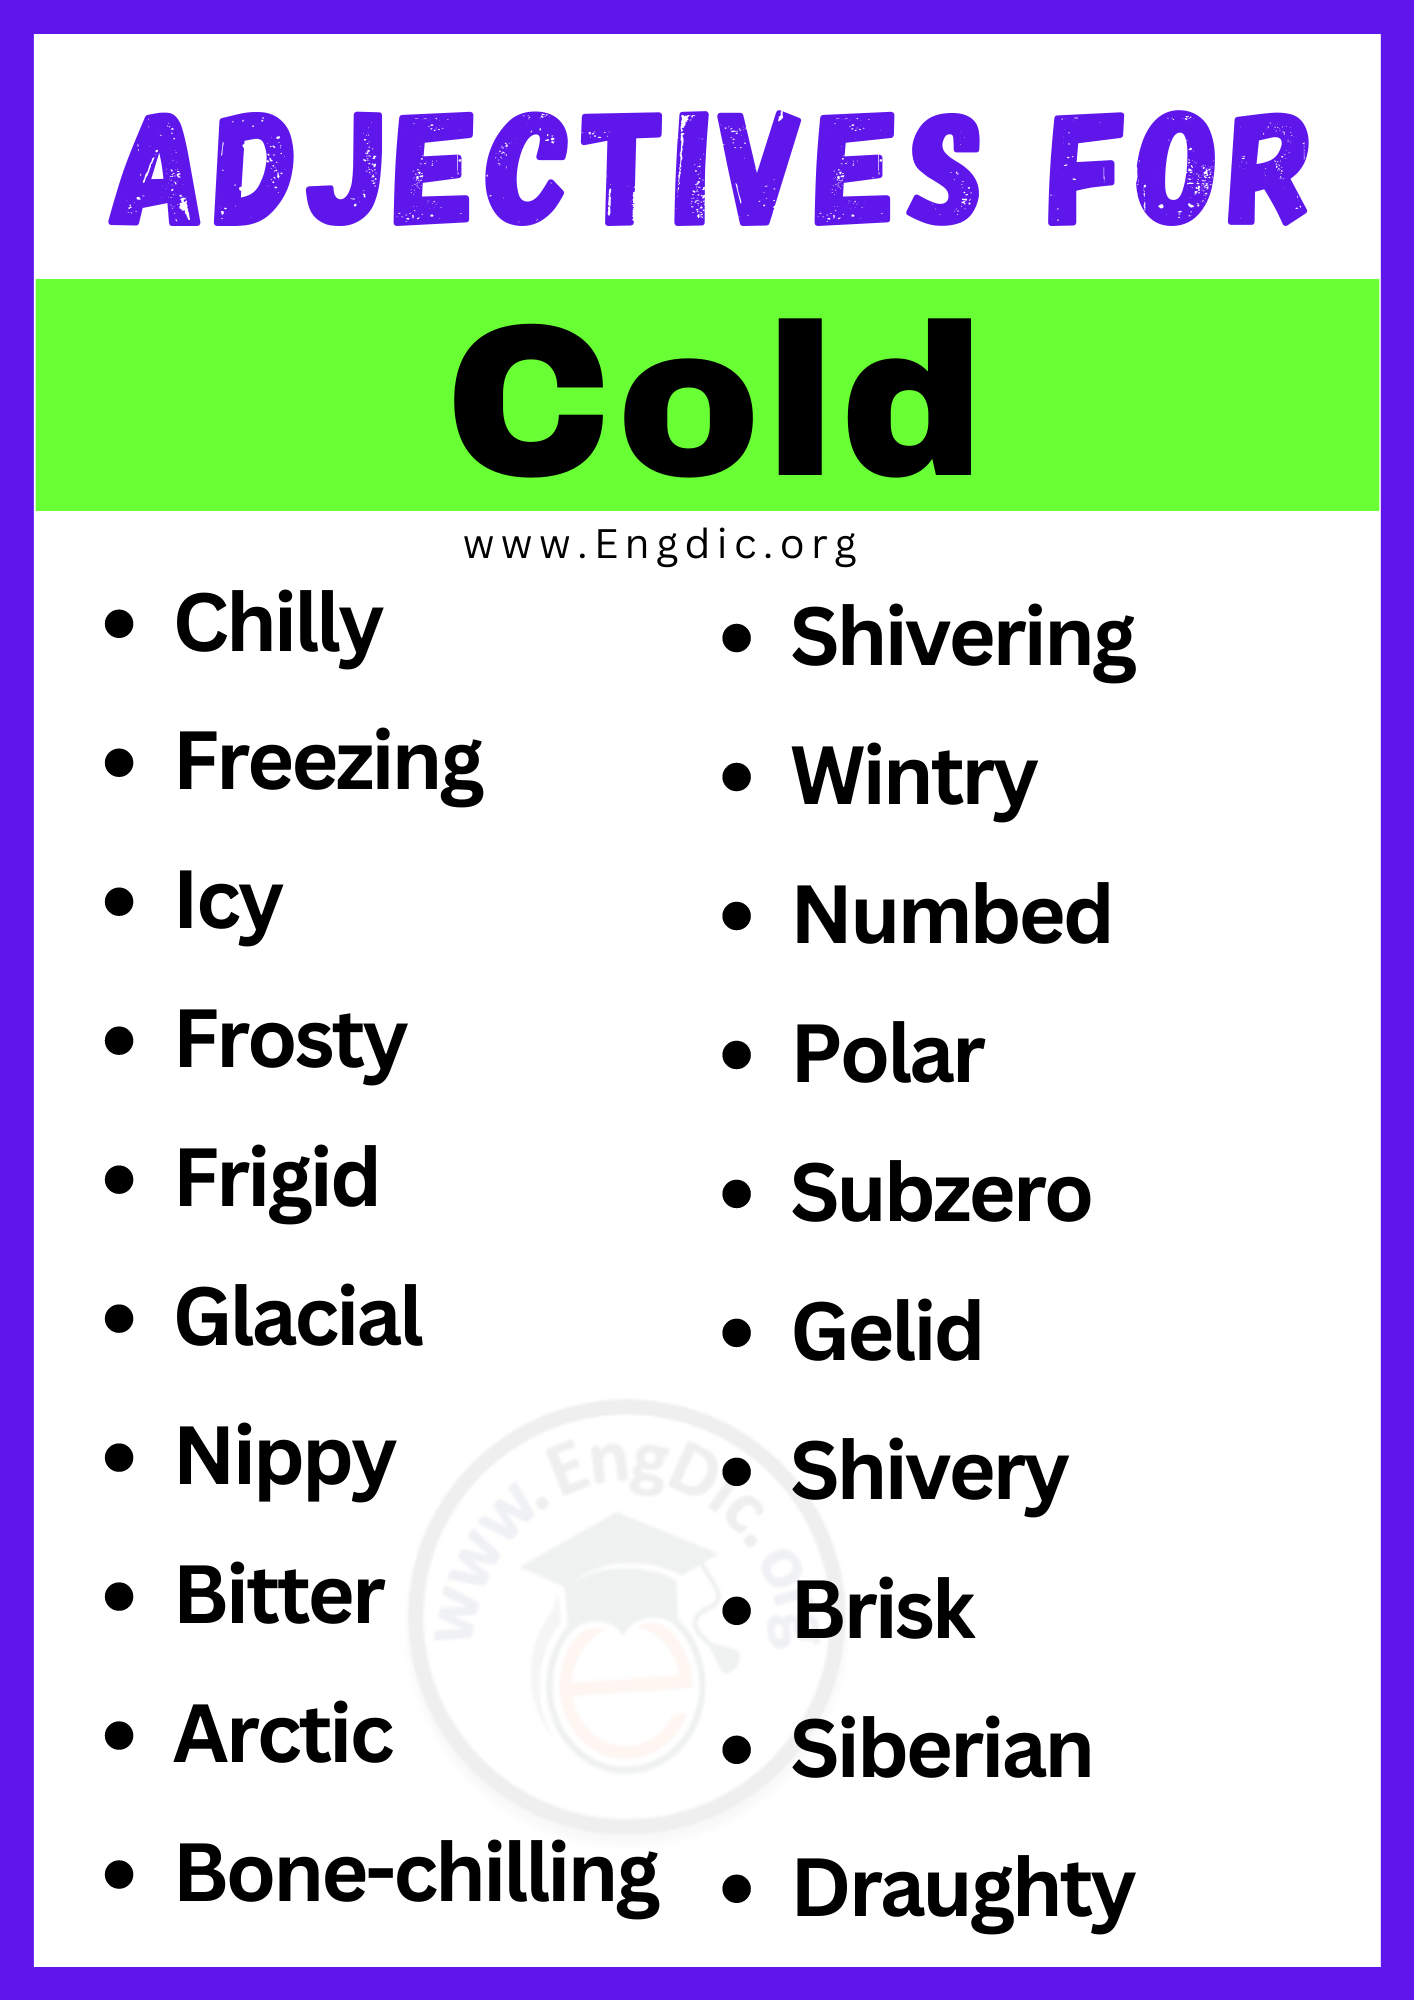 Adjectives for Cold